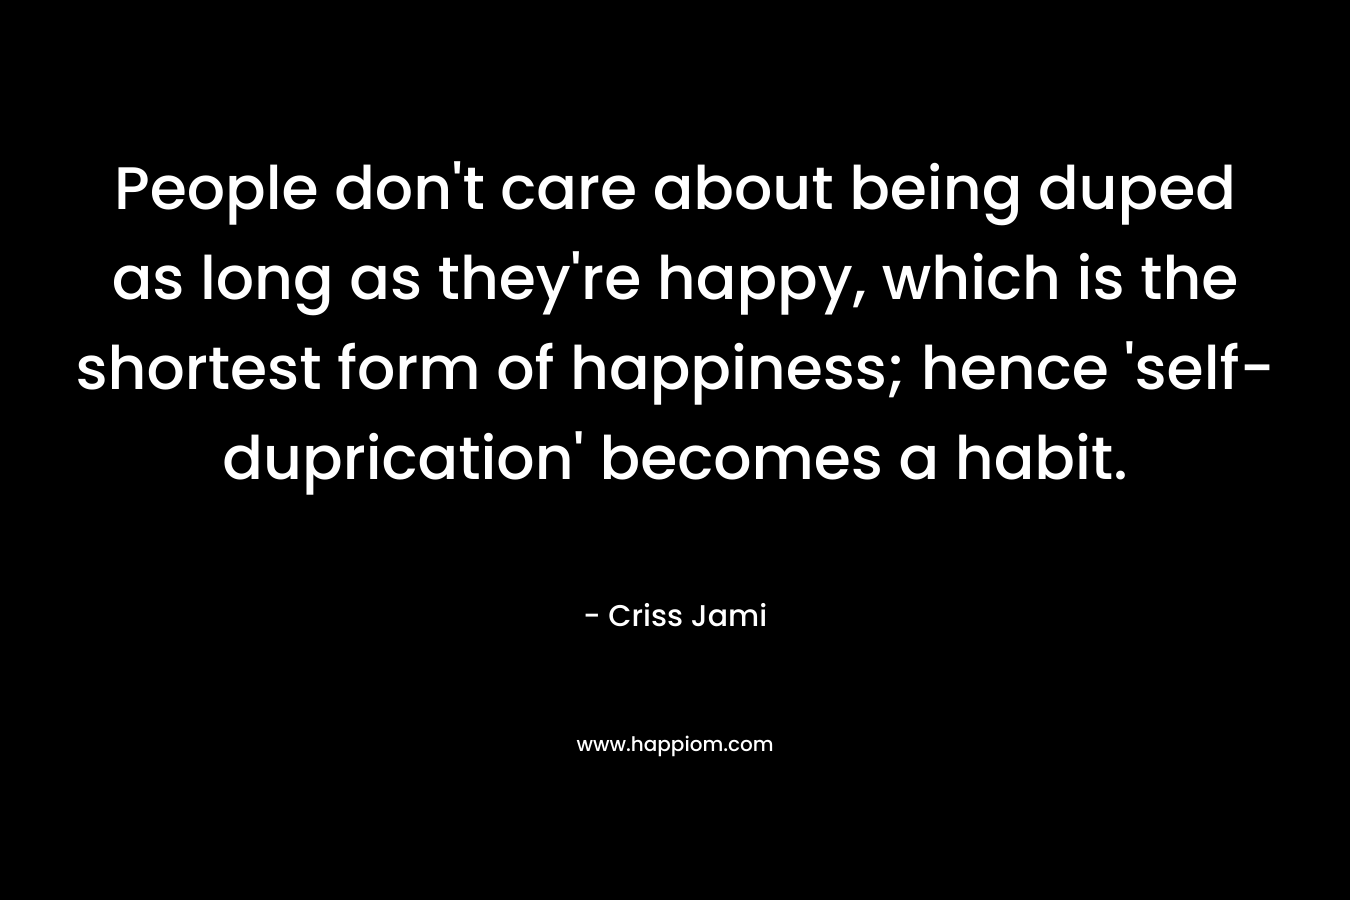 People don’t care about being duped as long as they’re happy, which is the shortest form of happiness; hence ‘self-duprication’ becomes a habit. – Criss Jami